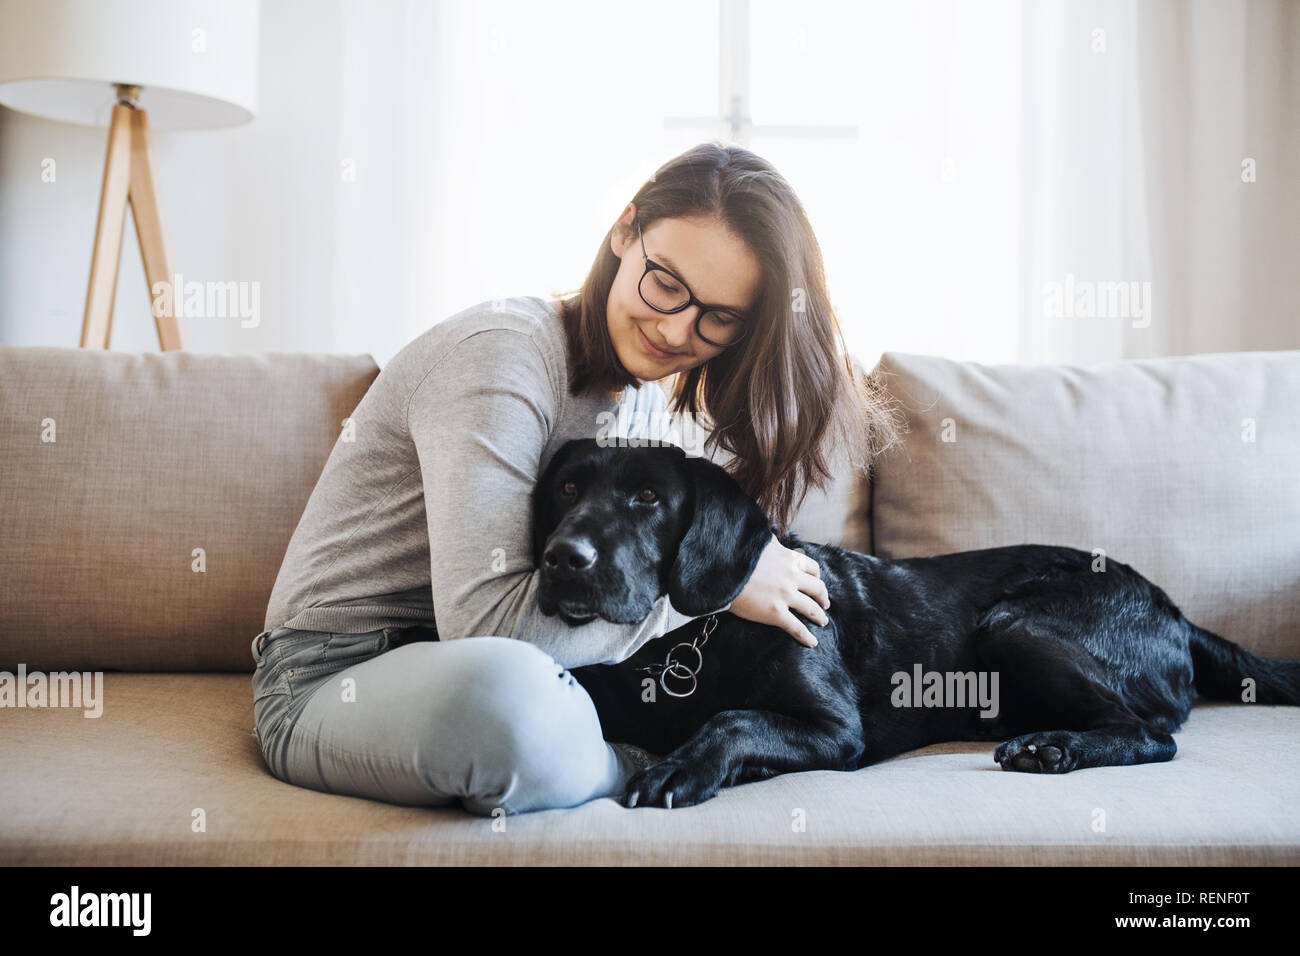 Teenage girl sitting on a sofa indoors, playing with a pet dog. Stock Photo